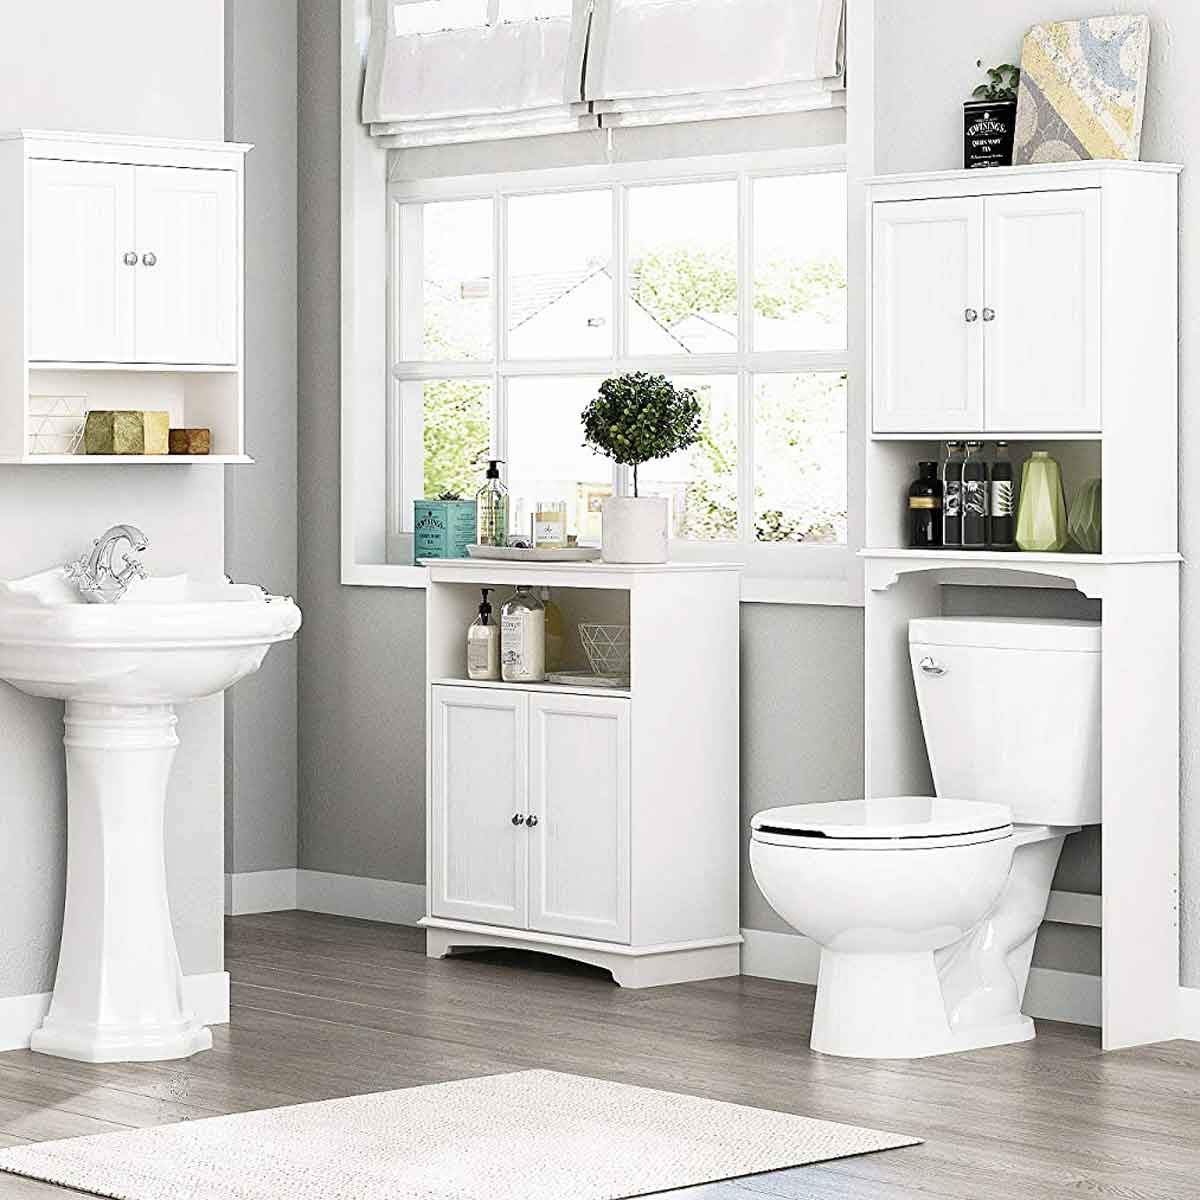 Spirich Home Bathroom Shelf Over The Toilet with 4 Cubbies